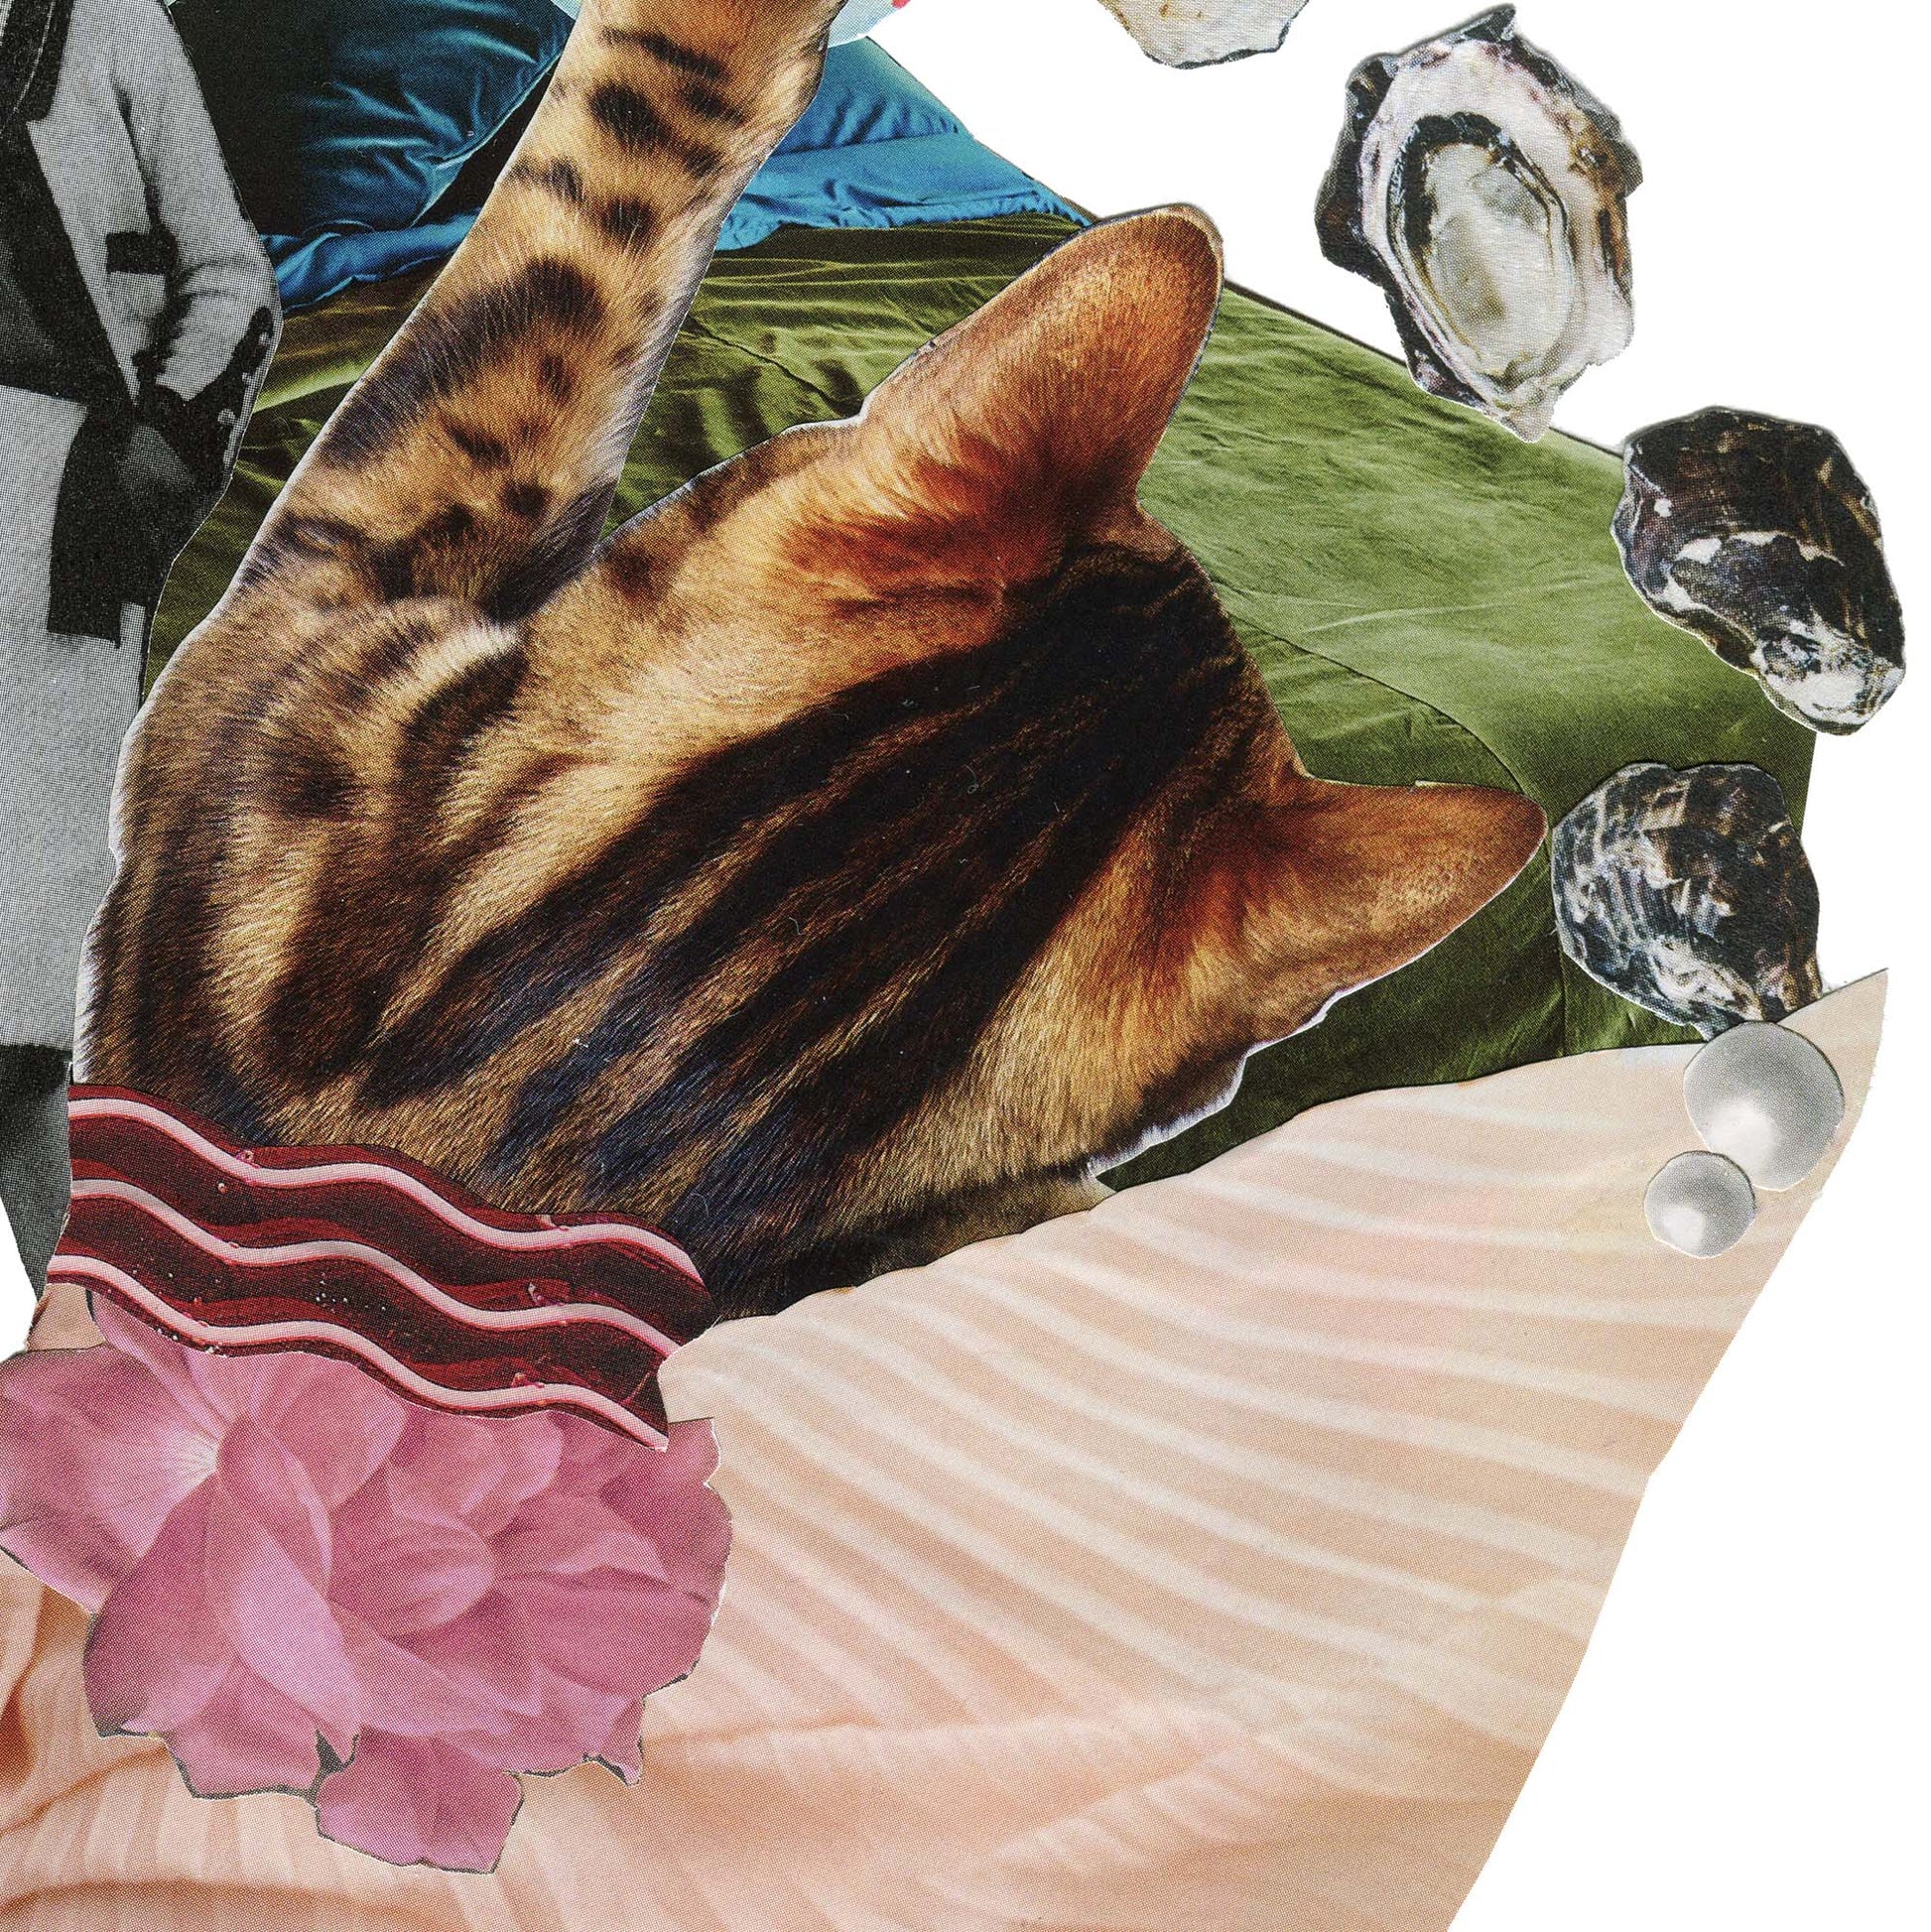 Detail of Dialed In fine art print by collage artist Marissa Schiesser. Close up shows a tabby cat surrounded by pleated fabric.